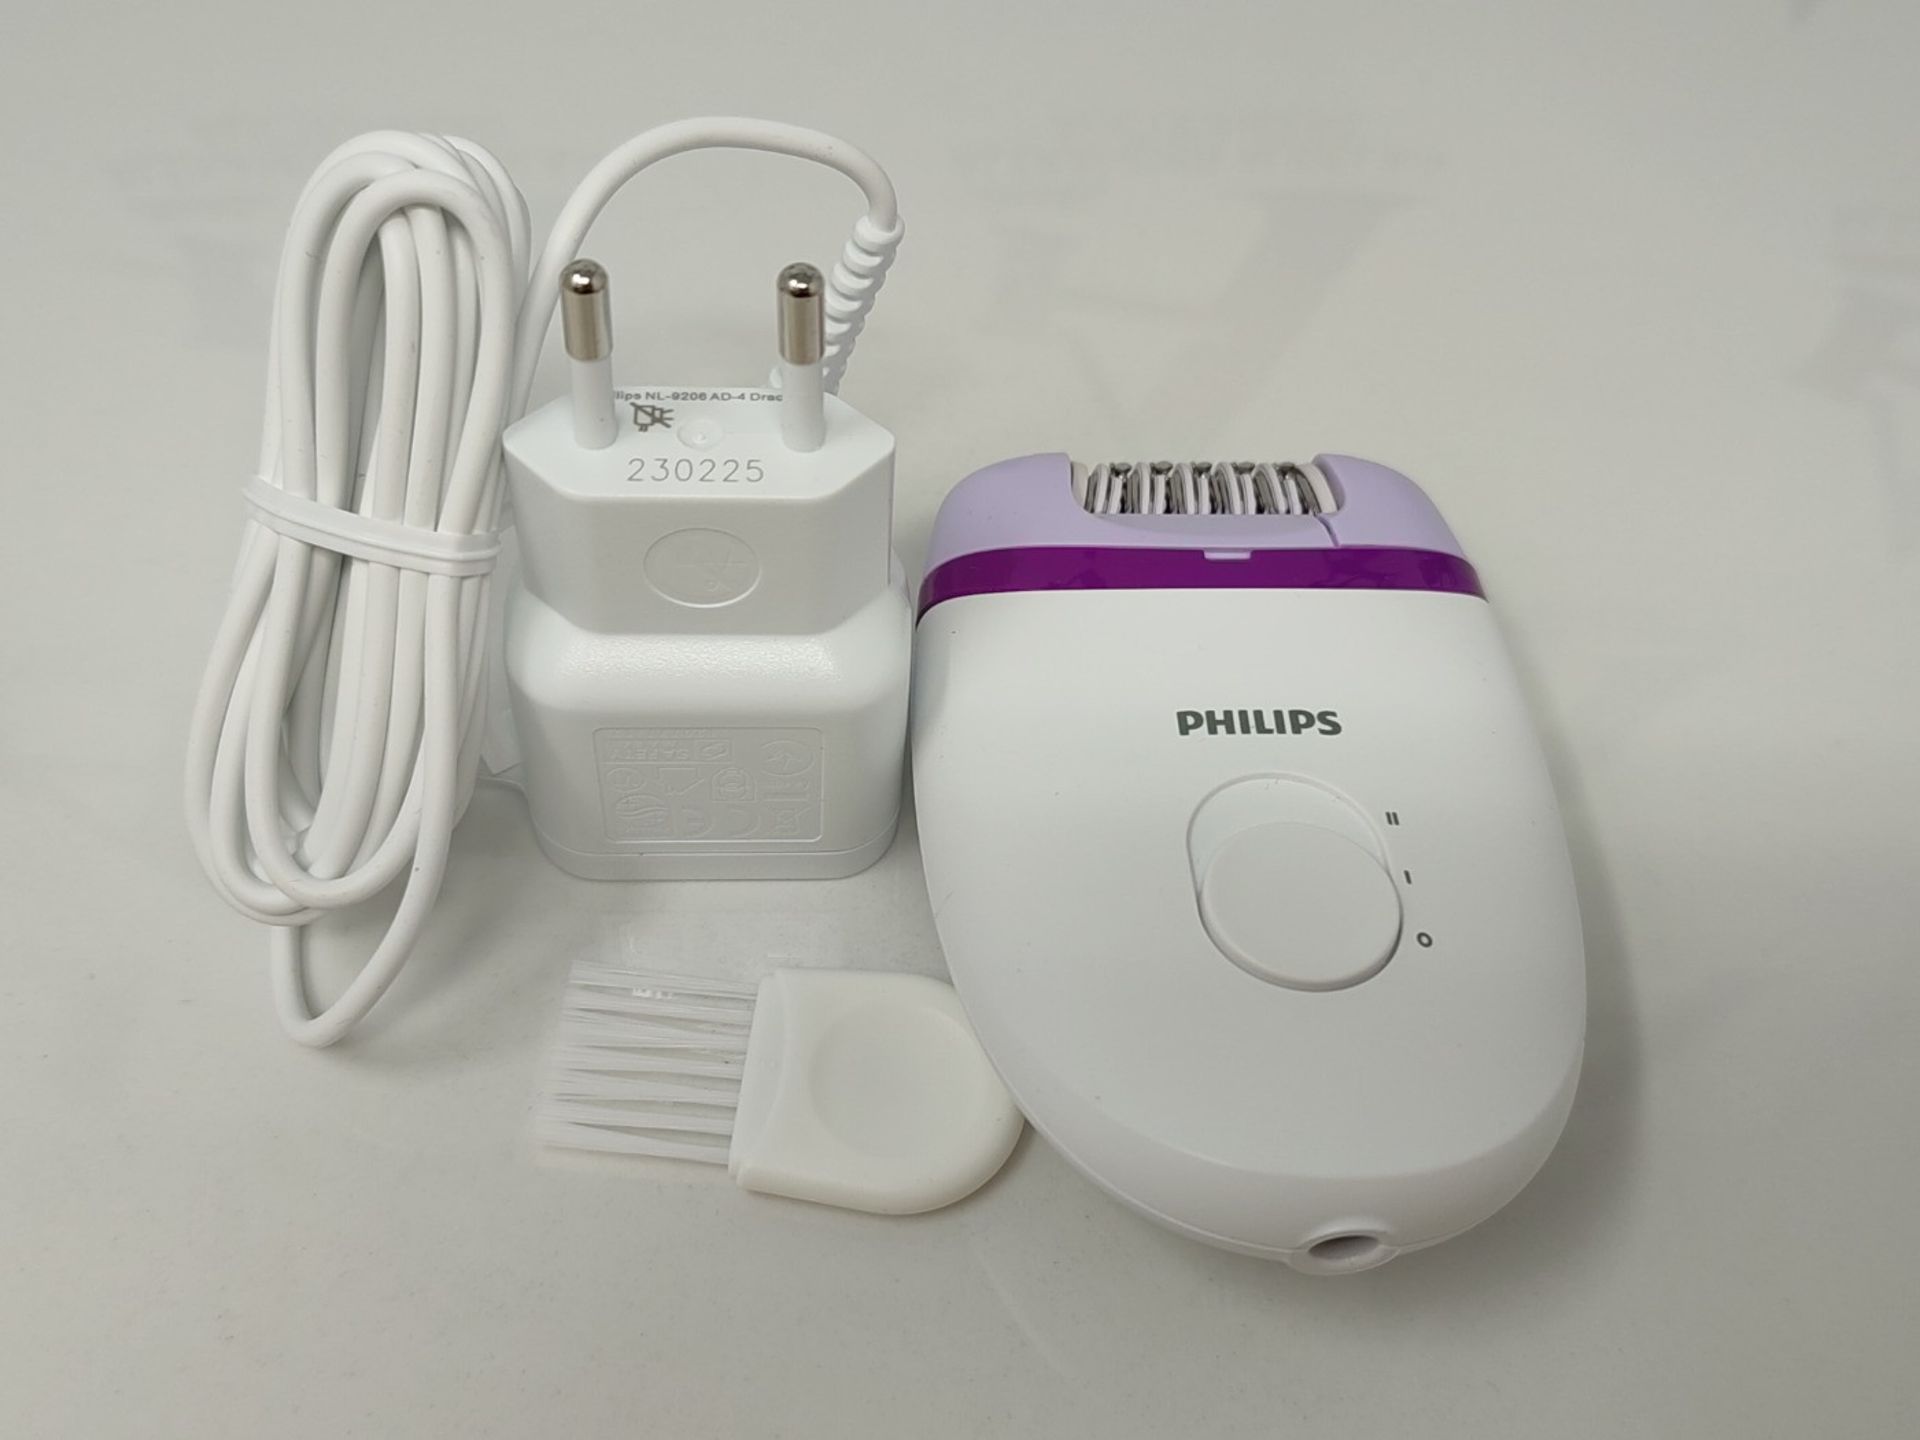 Philips Satinelle Essential Epilator with 21 attachments and 2 speed settings (model B - Image 3 of 3